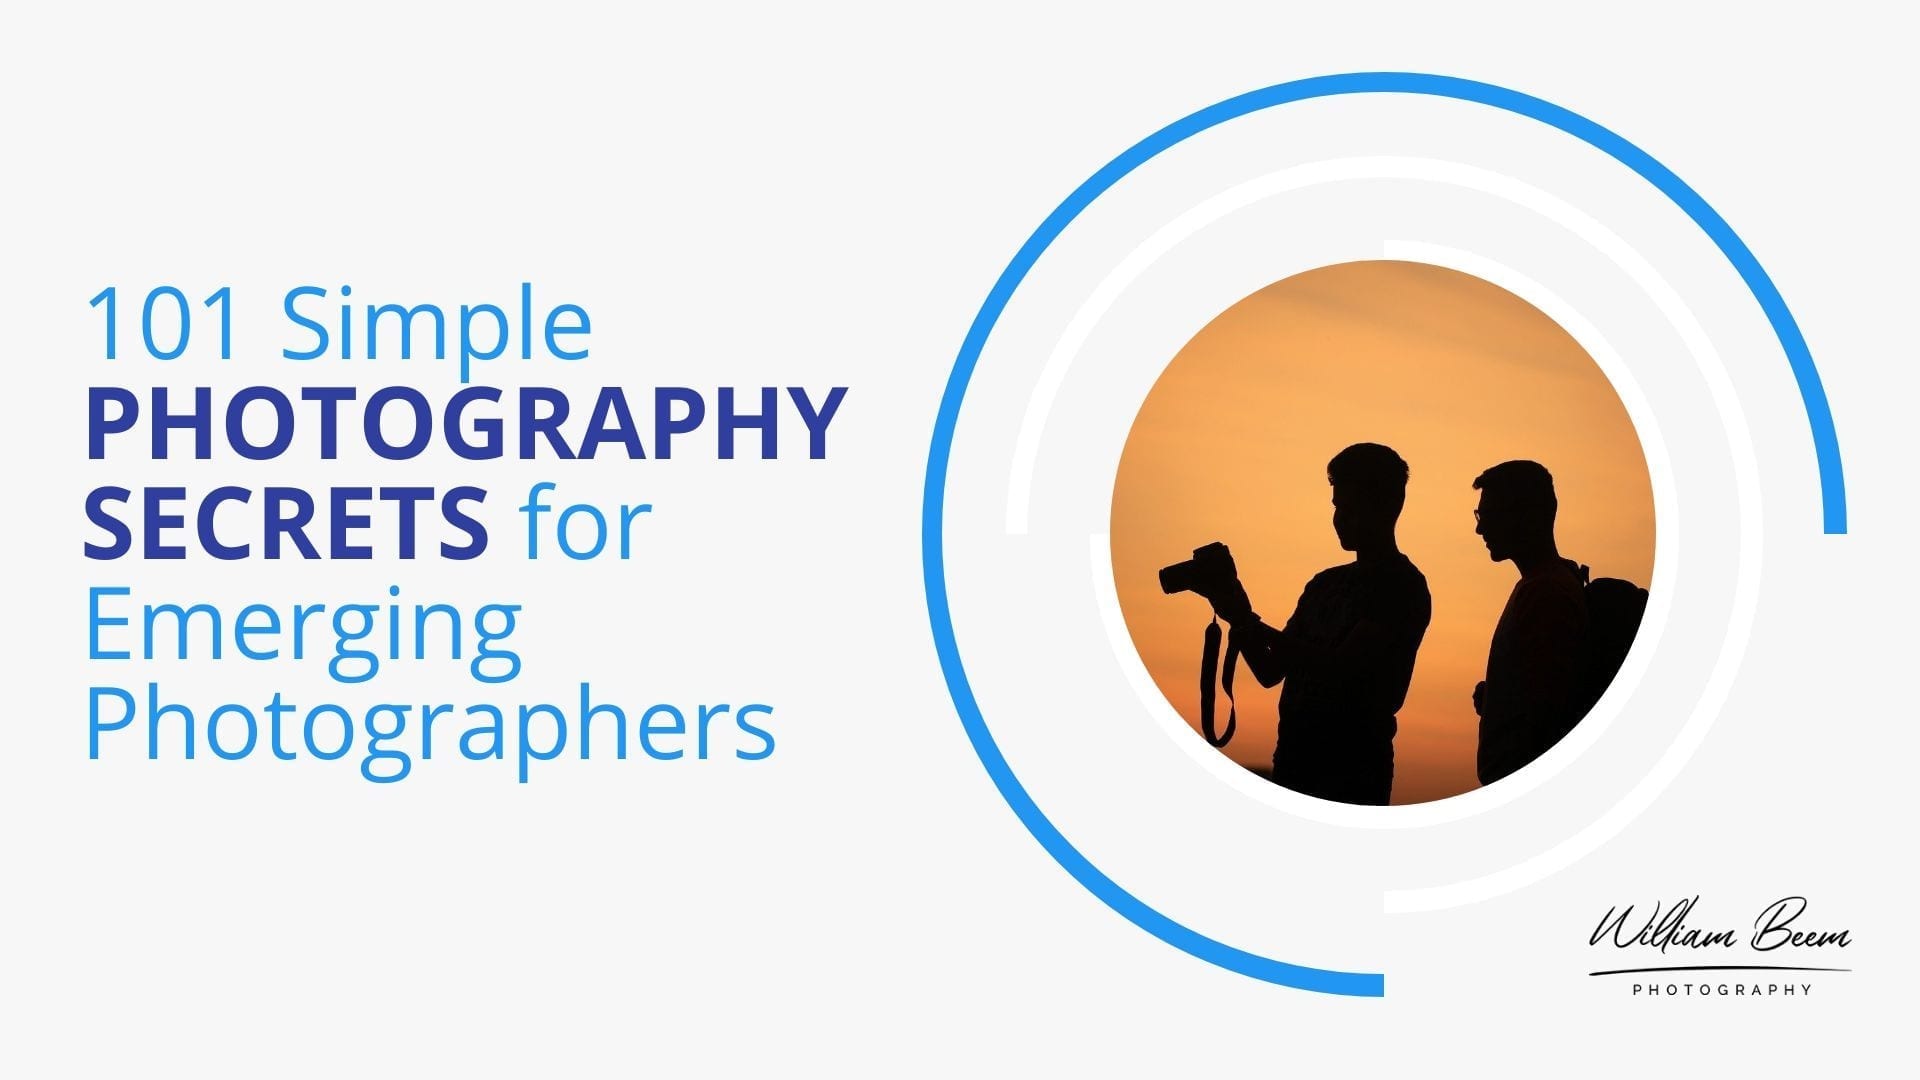 101 Simple Photography Secrets for Emerging Photographers